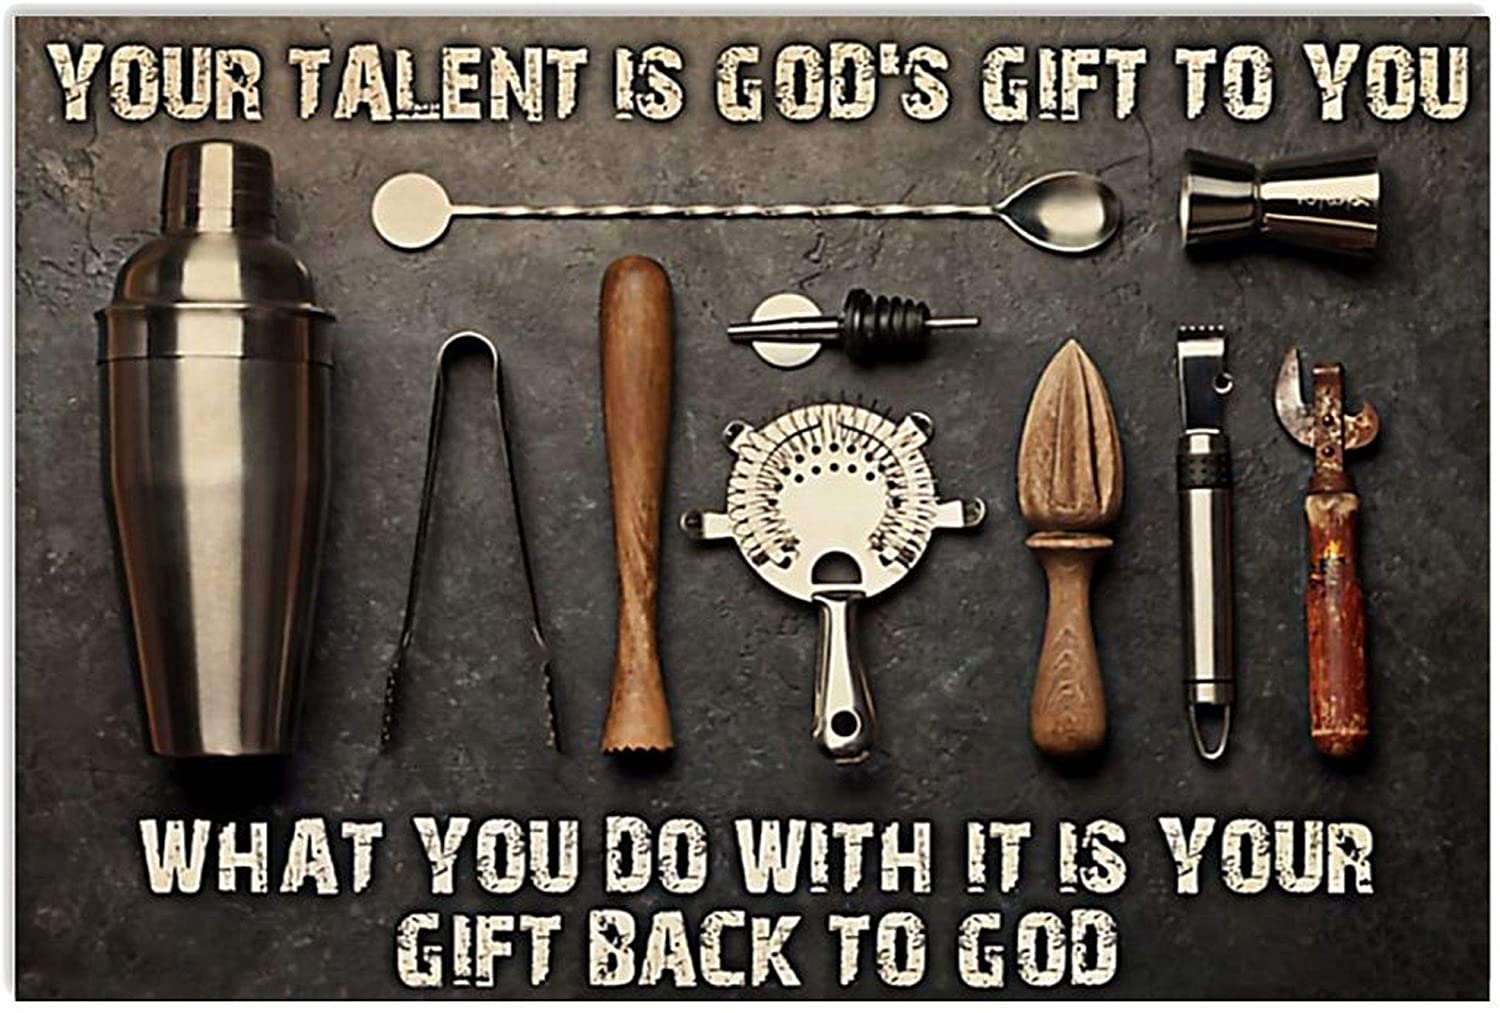 ANDIEZ Bartender Your Talent is God's Gift to You What You Do with It is Your Gift Back to God Poster